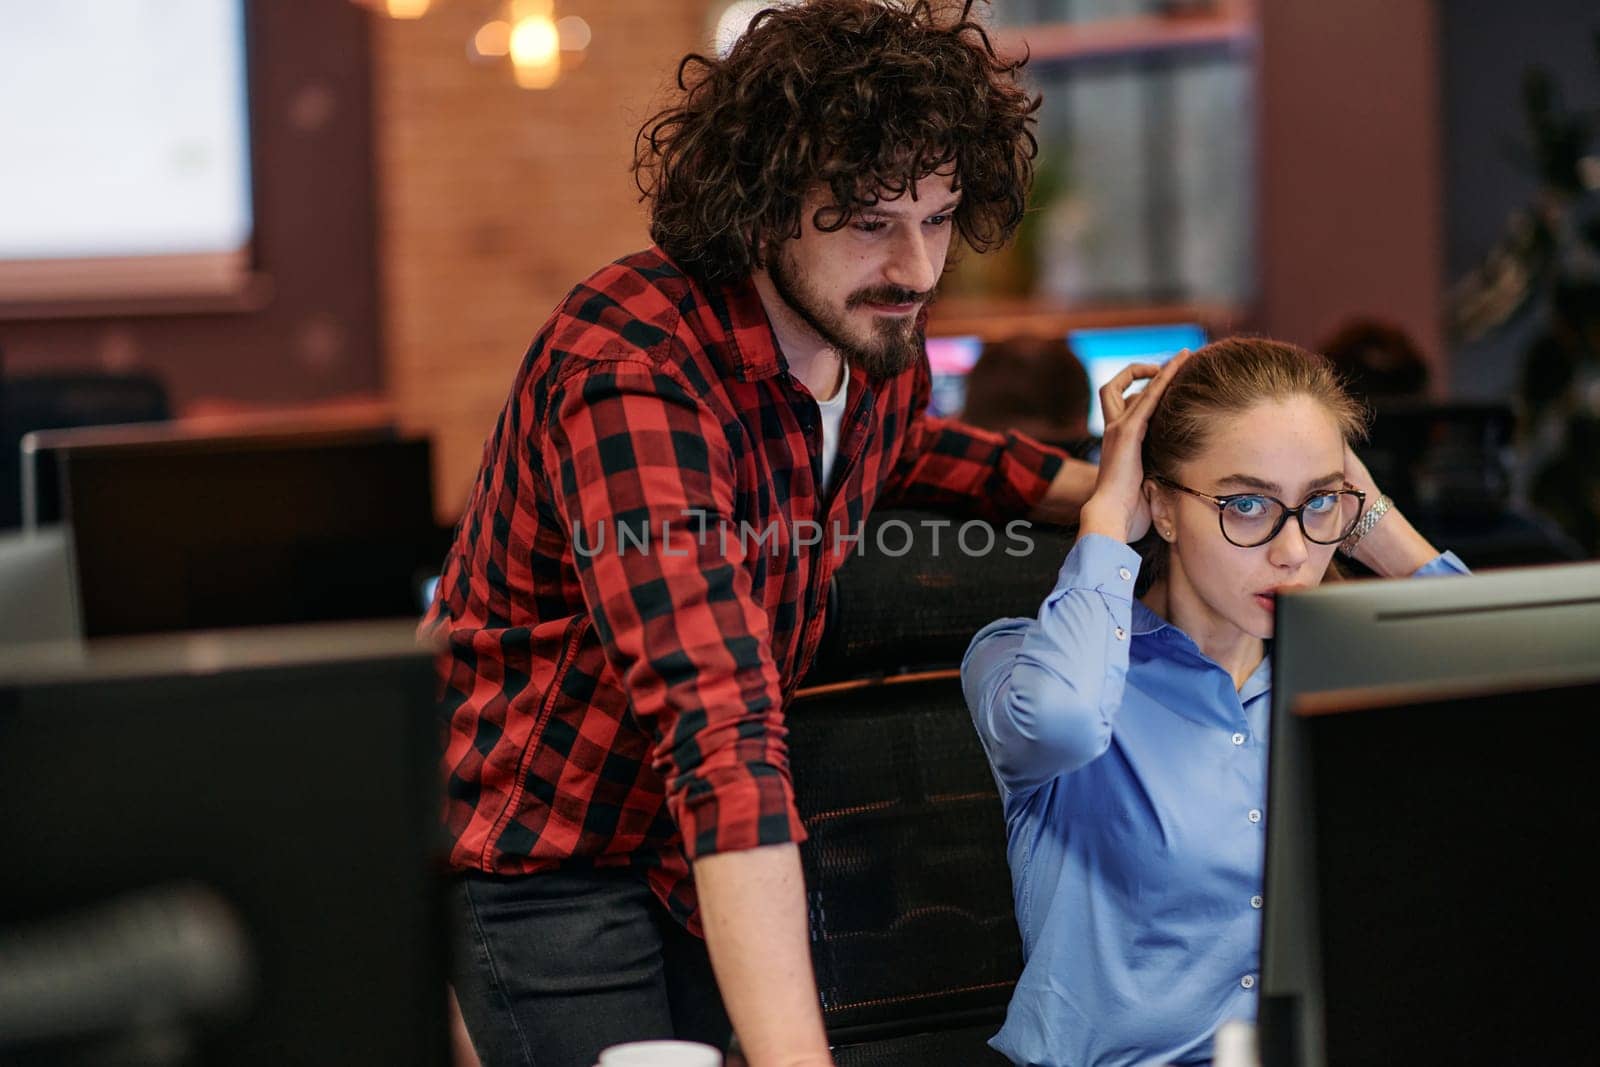 Business colleagues, a man and a woman, engage in discussing business strategies while attentively gazing at a computer monitor, epitomizing collaboration and innovation.